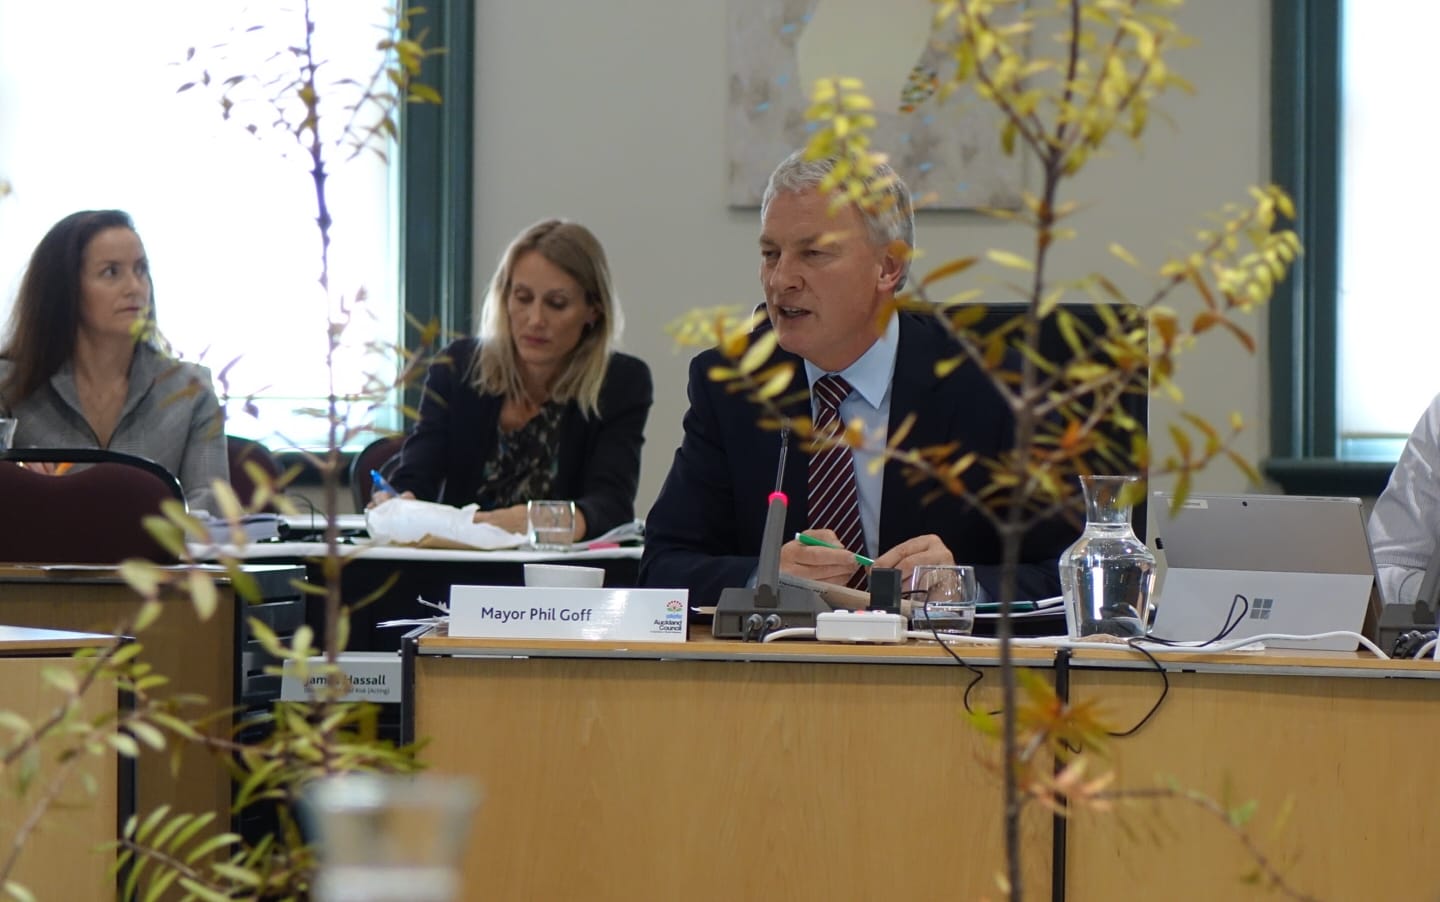 Auckland Mayor Phil Goff speaks at the meeting. Council voted for a half-way option, a partial closure of the Waitakere Ranges.